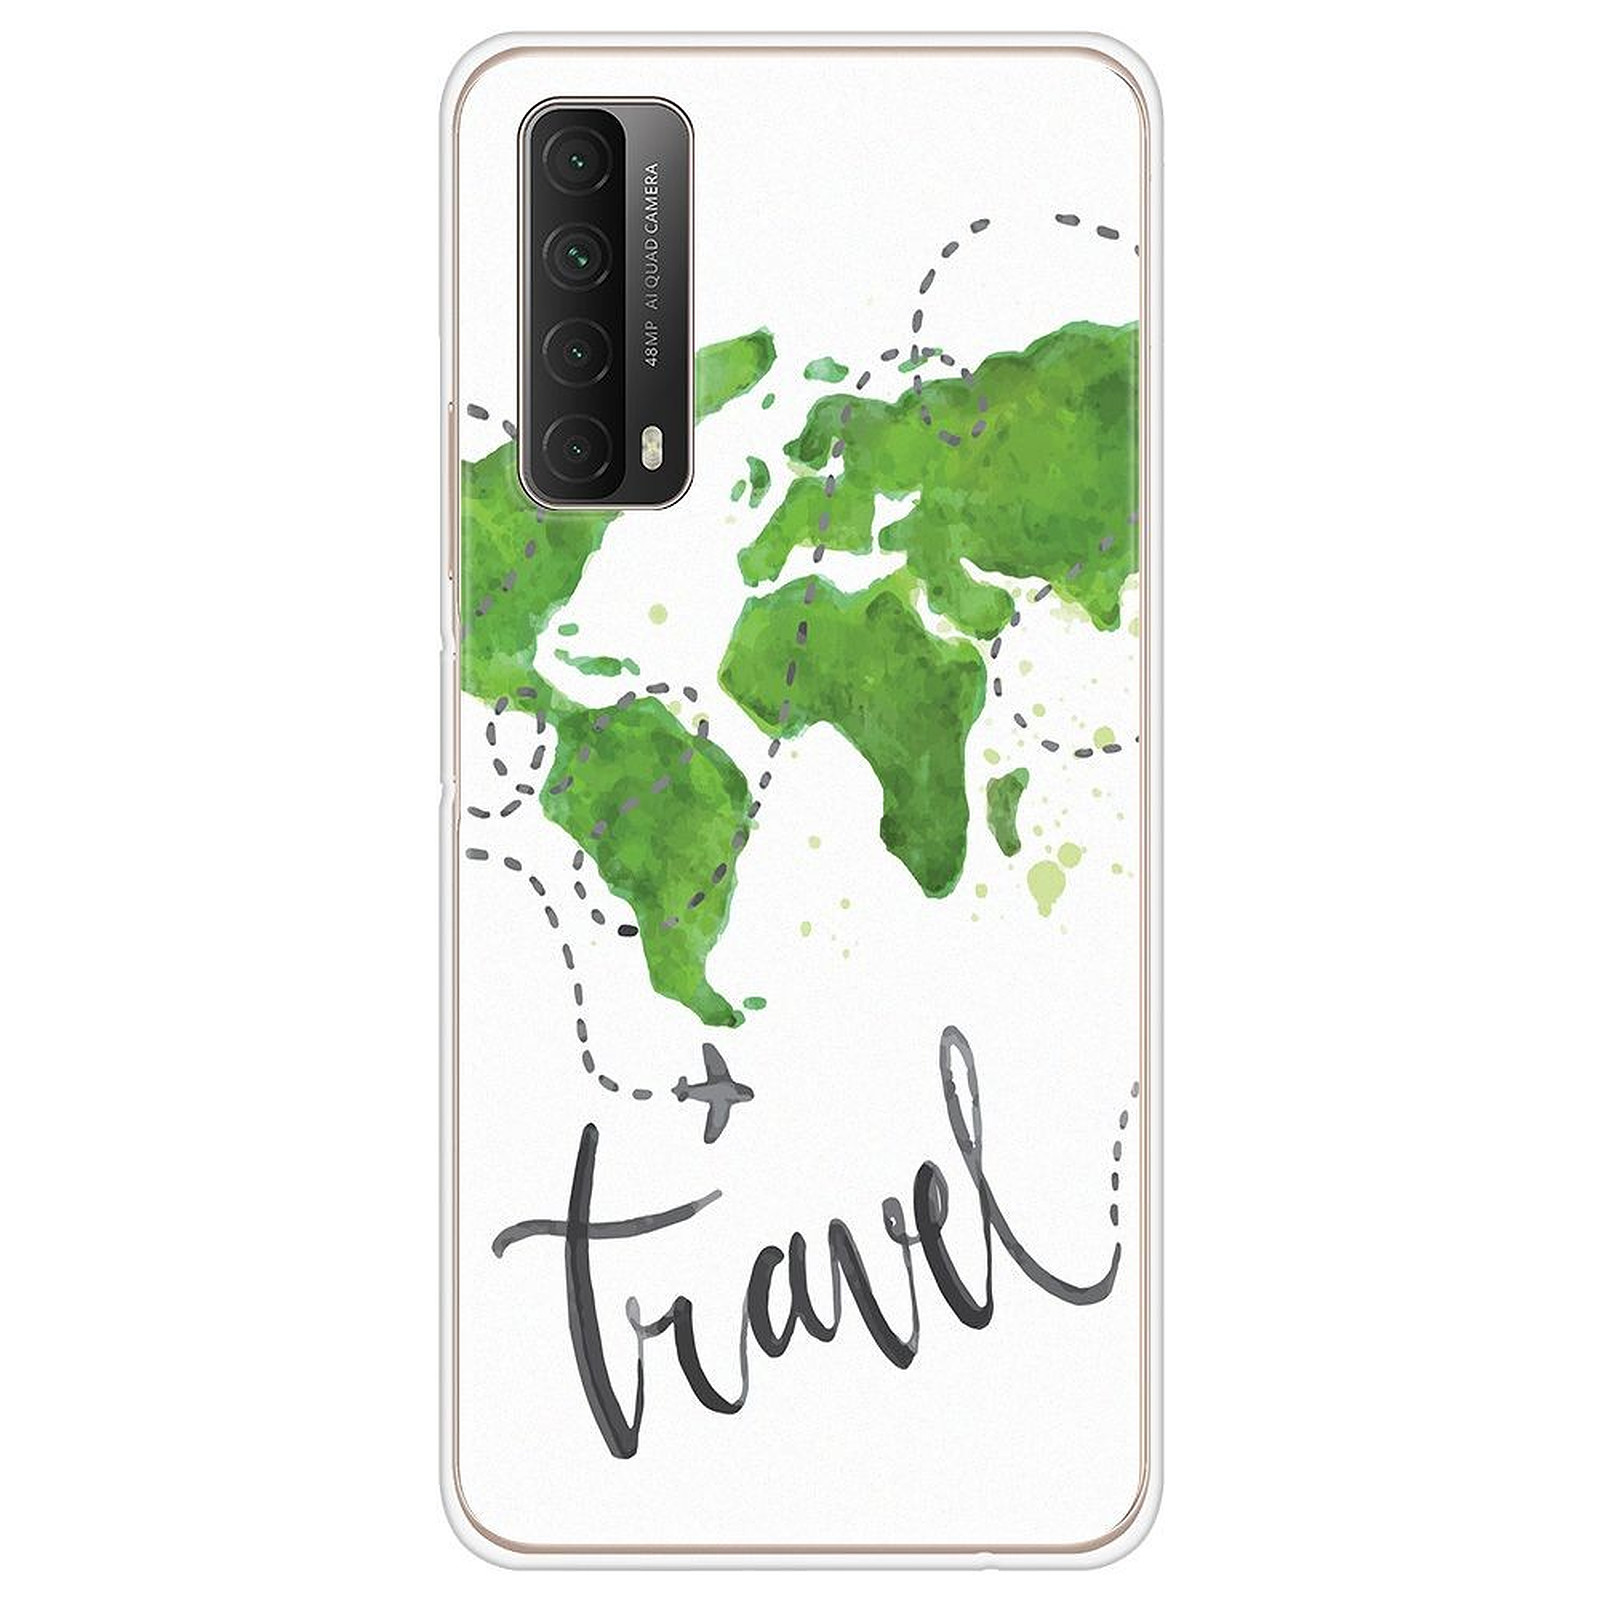 1001 Coques Coque silicone gel Huawei P Smart 2021 motif Map Travel - Coque telephone 1001Coques